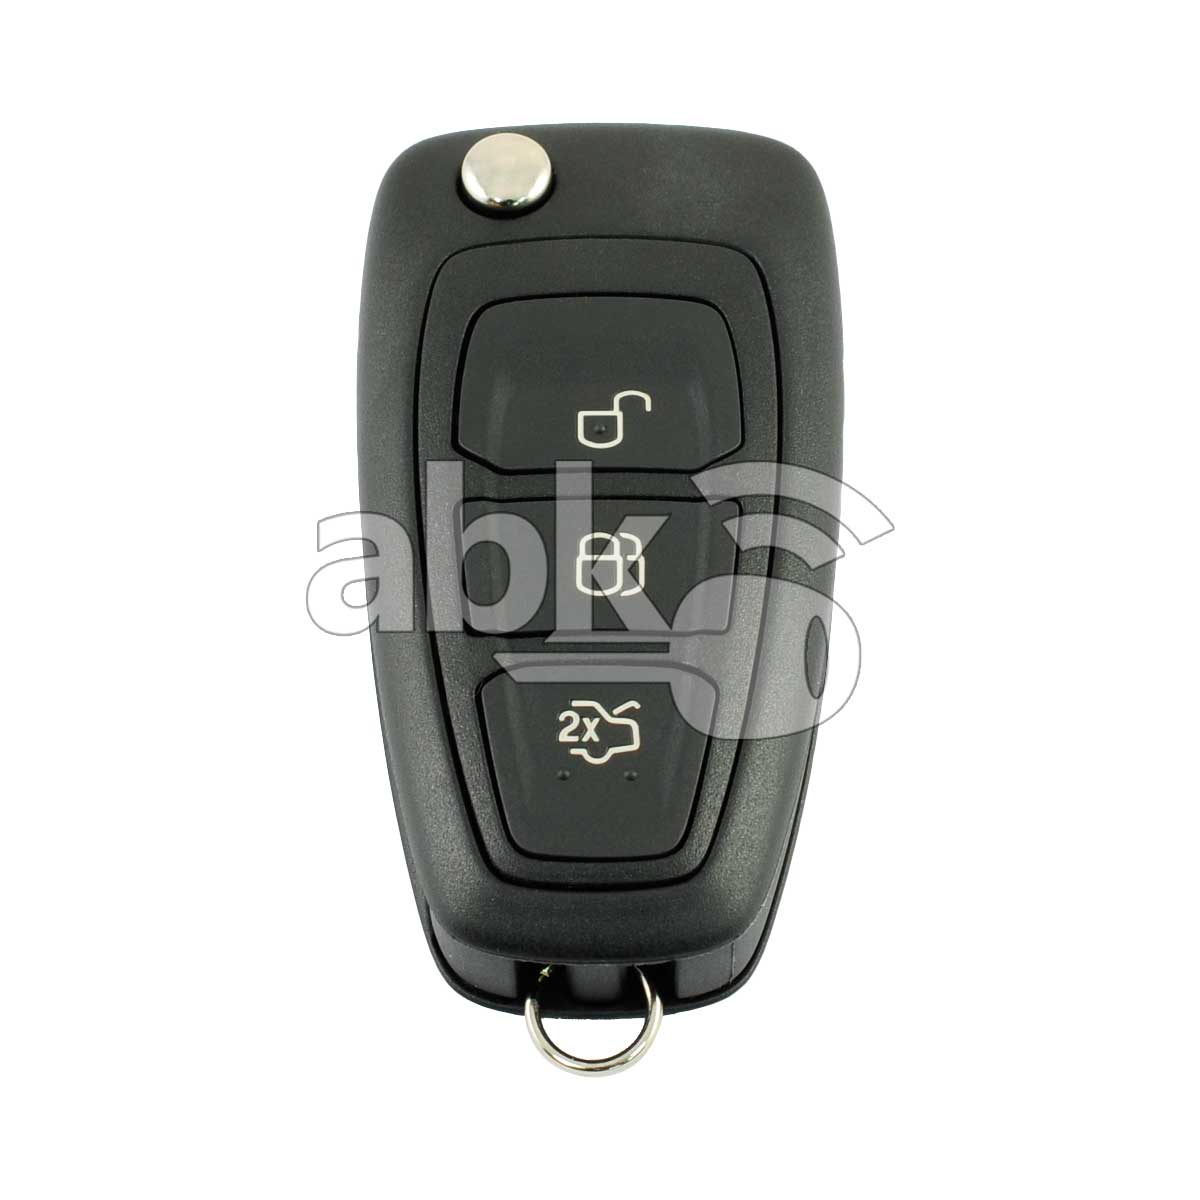 Ford Focus Mondeo C-Max 2010+ Flip Remote 3Buttons 2180803 1743826 434MHz 5WK49986 HU101 - ABK-4121